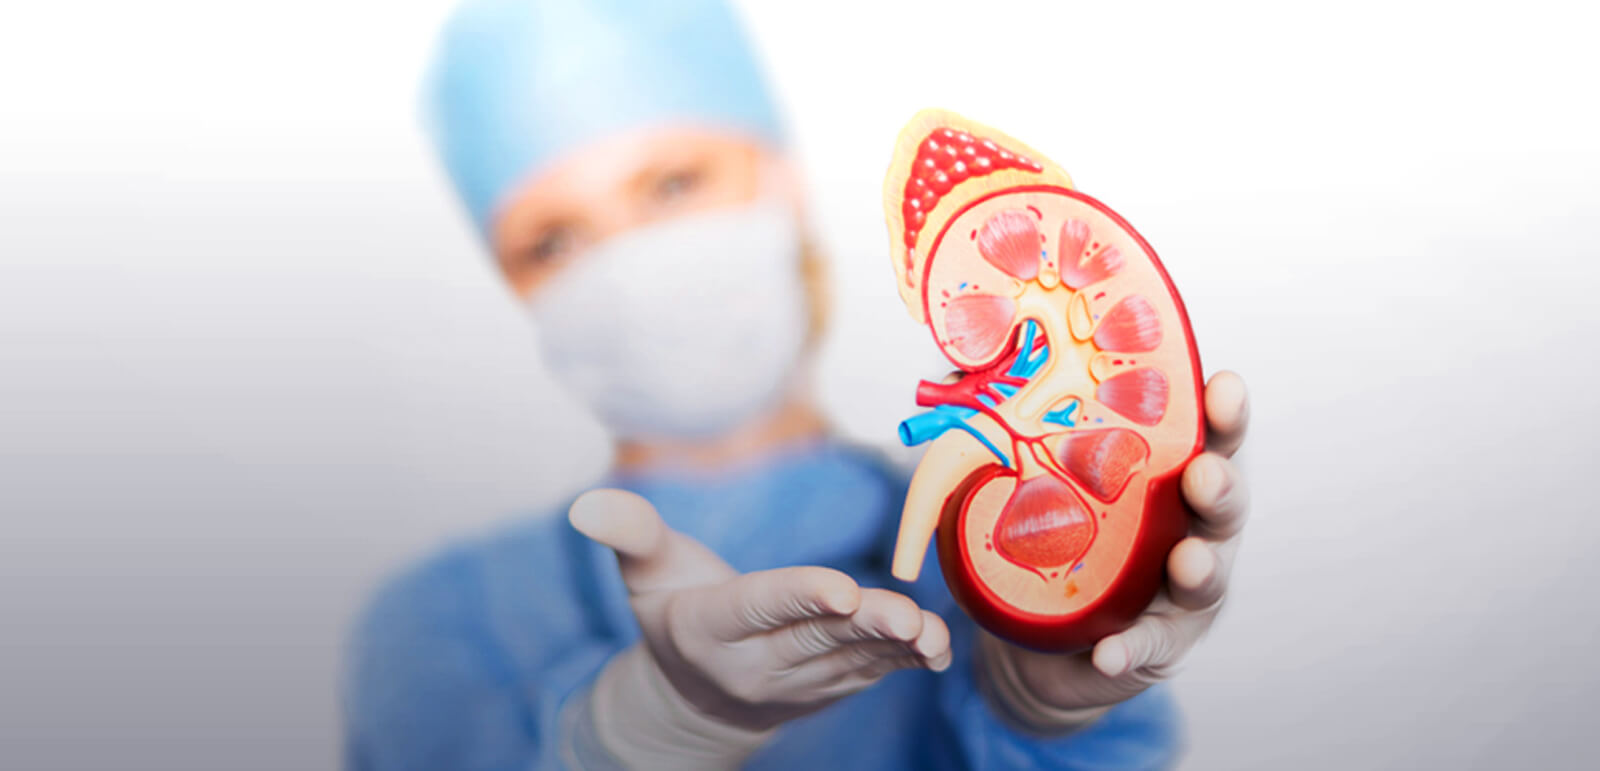 Nephrology-Referrals-Reveal-That-Patients-At-Low-Risk-For-Progression-1